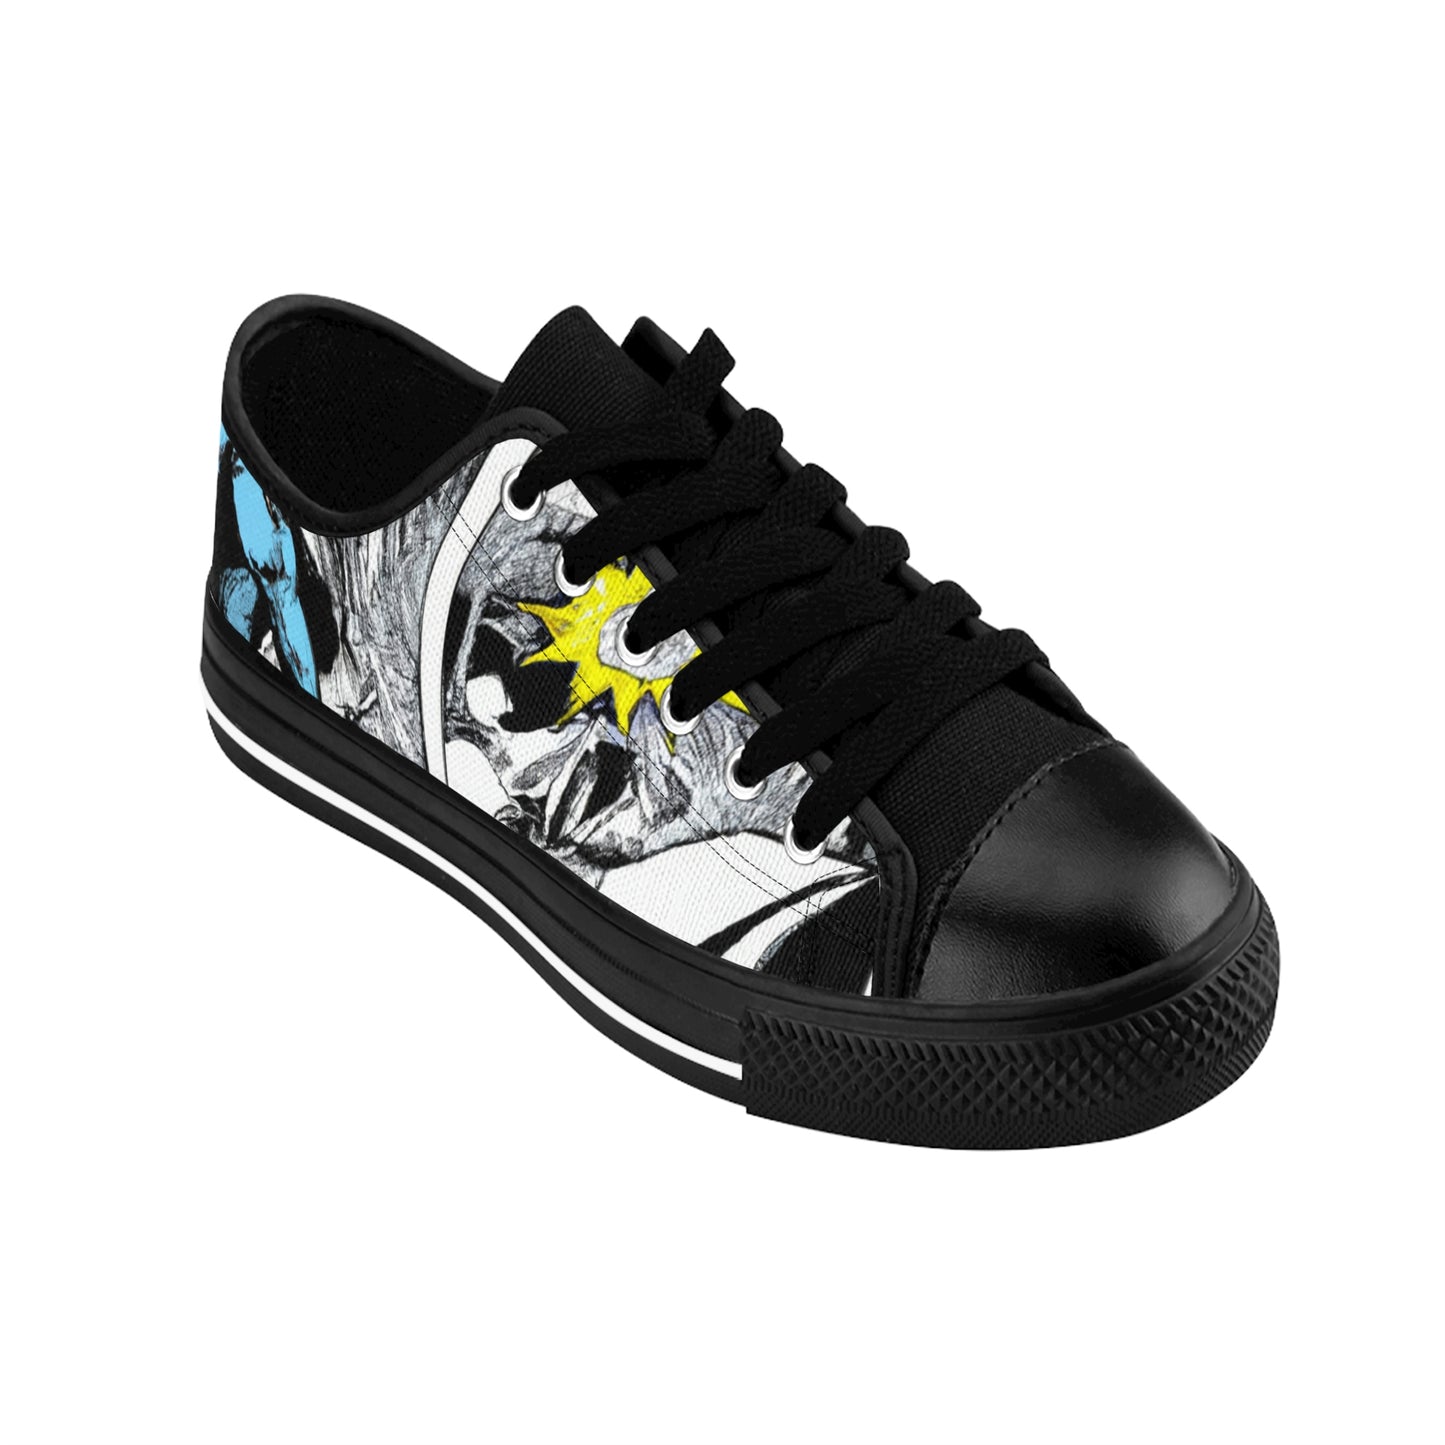 .

Lefricus the Shoemaker - Comic Book Low Top